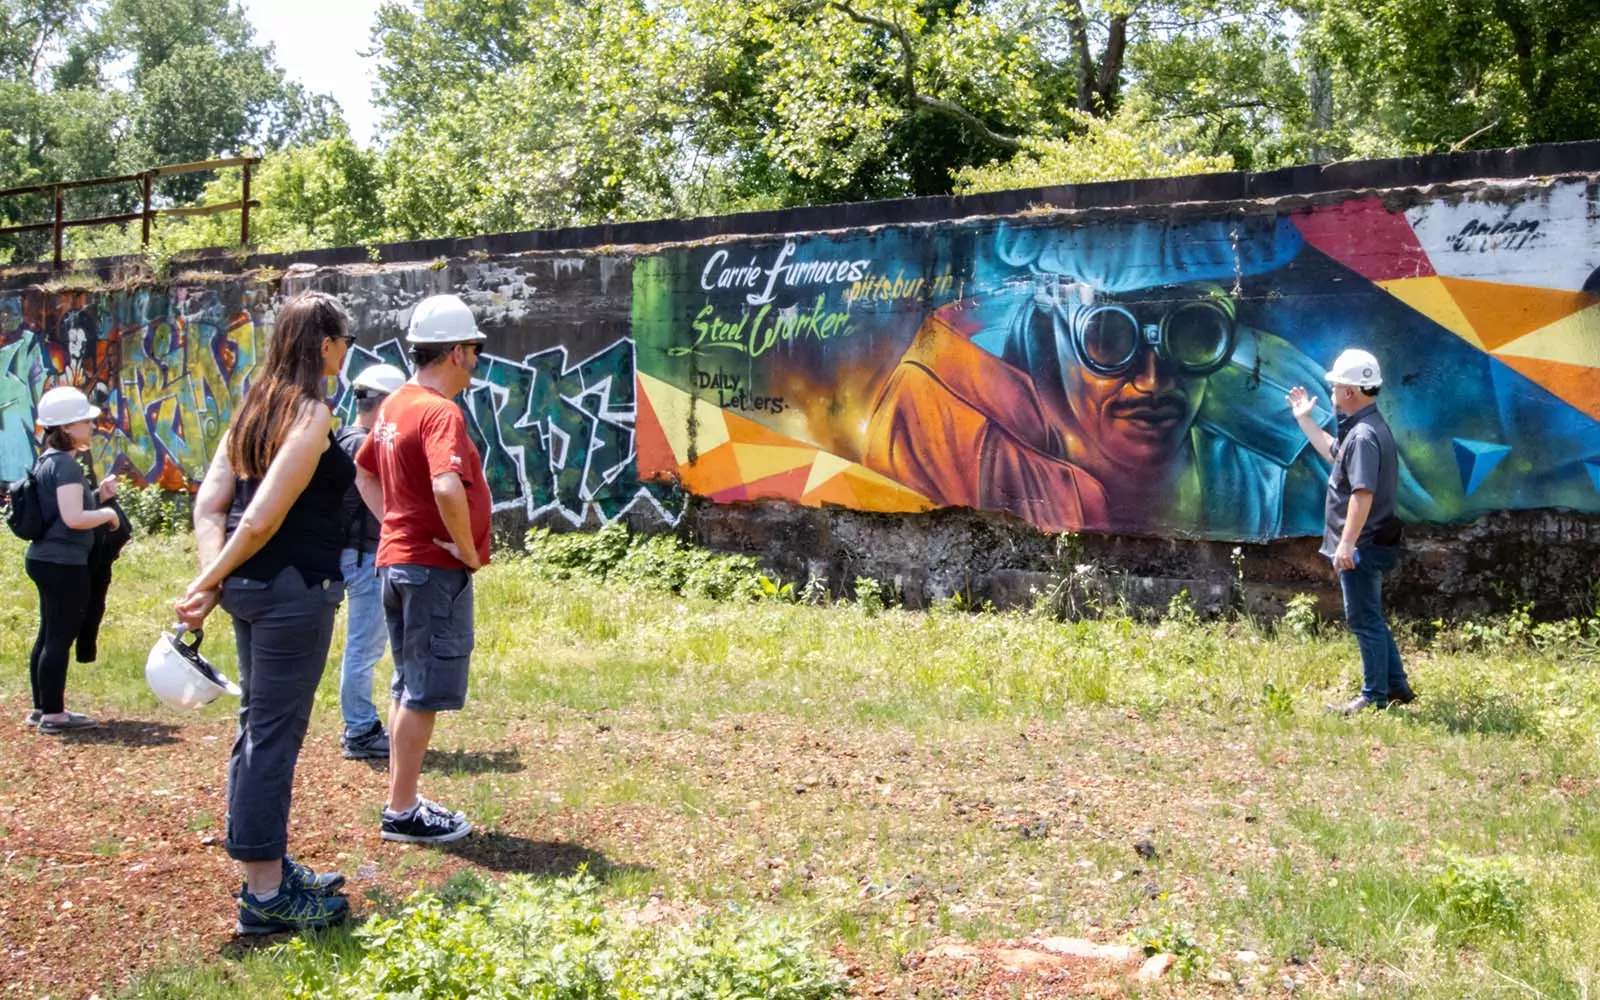 People look at a graffiti mural while someone points at it.